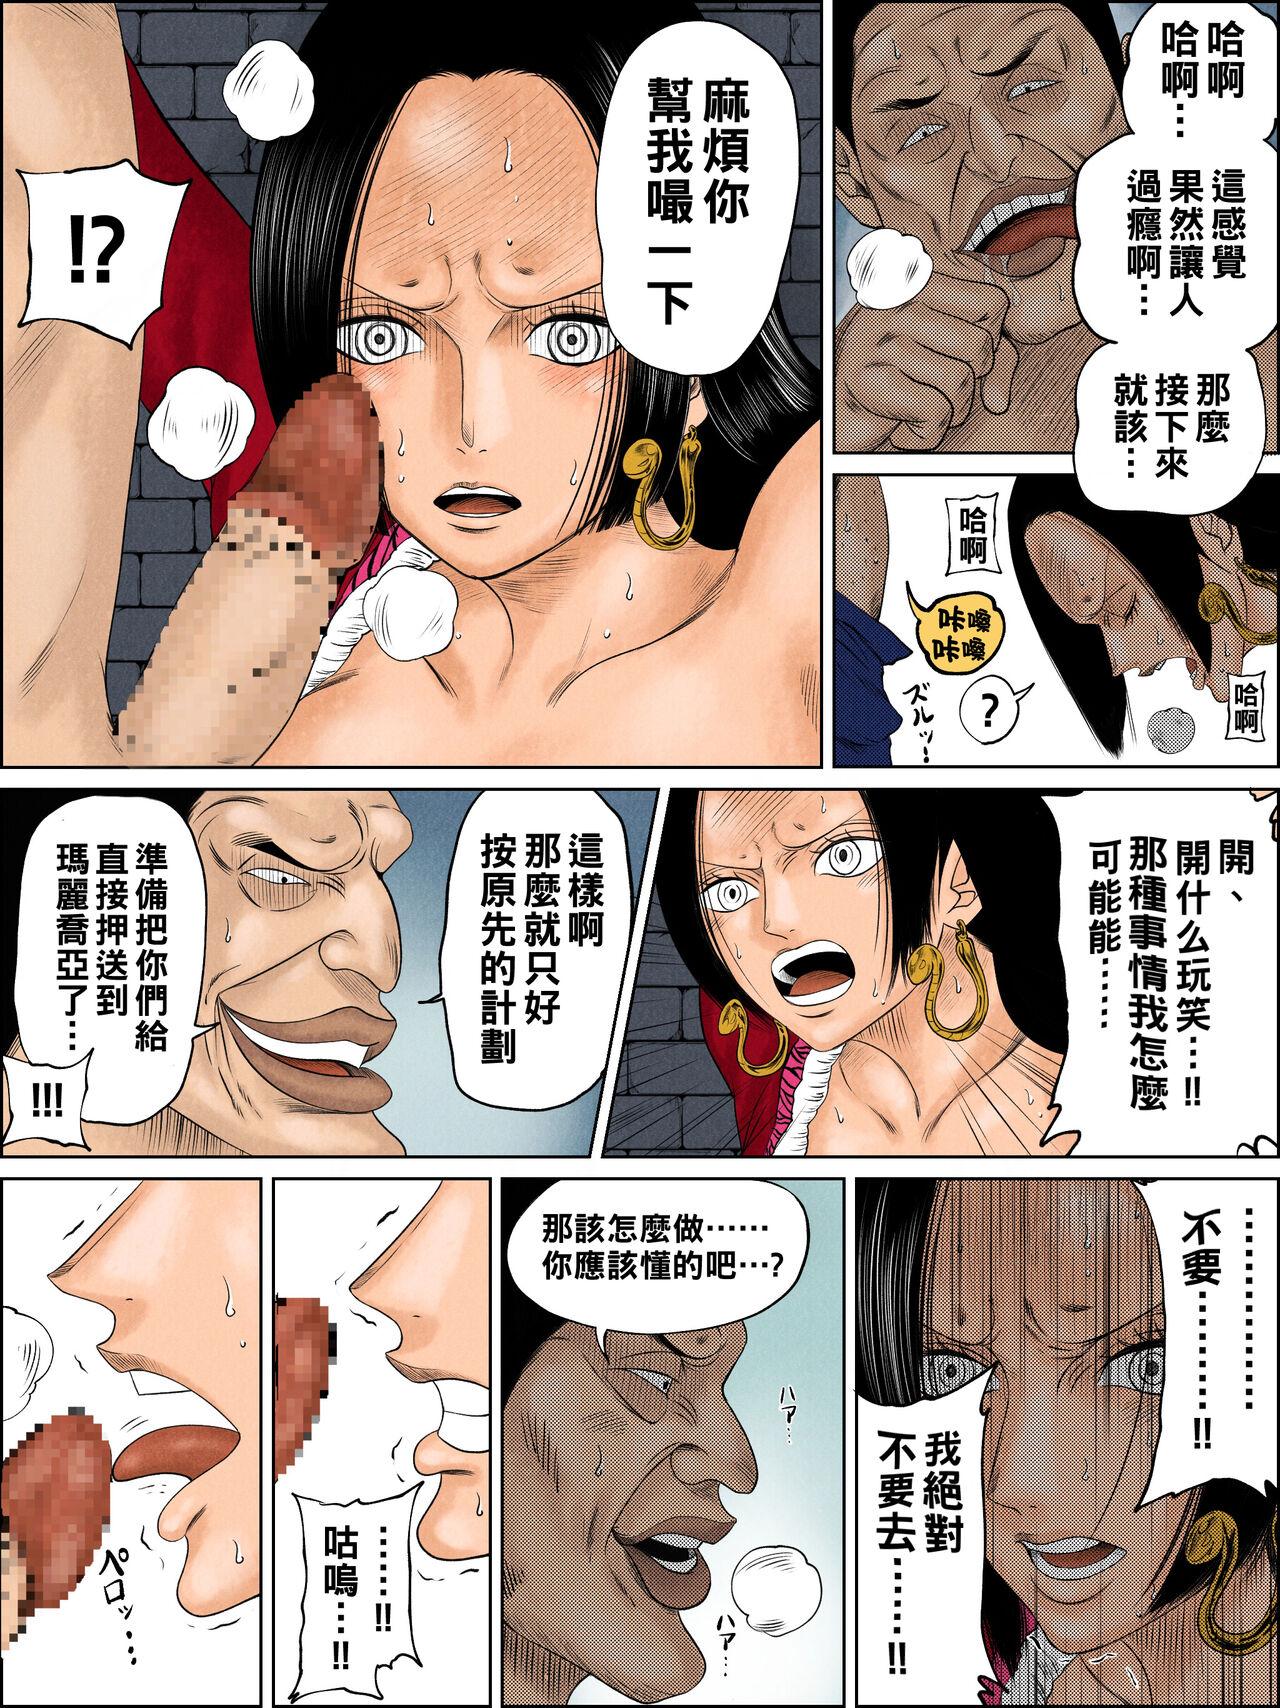 Dicks [アズライトン] ハンコック漫画 (ワンピース)（Chinese） - One piece Toilet - Page 3